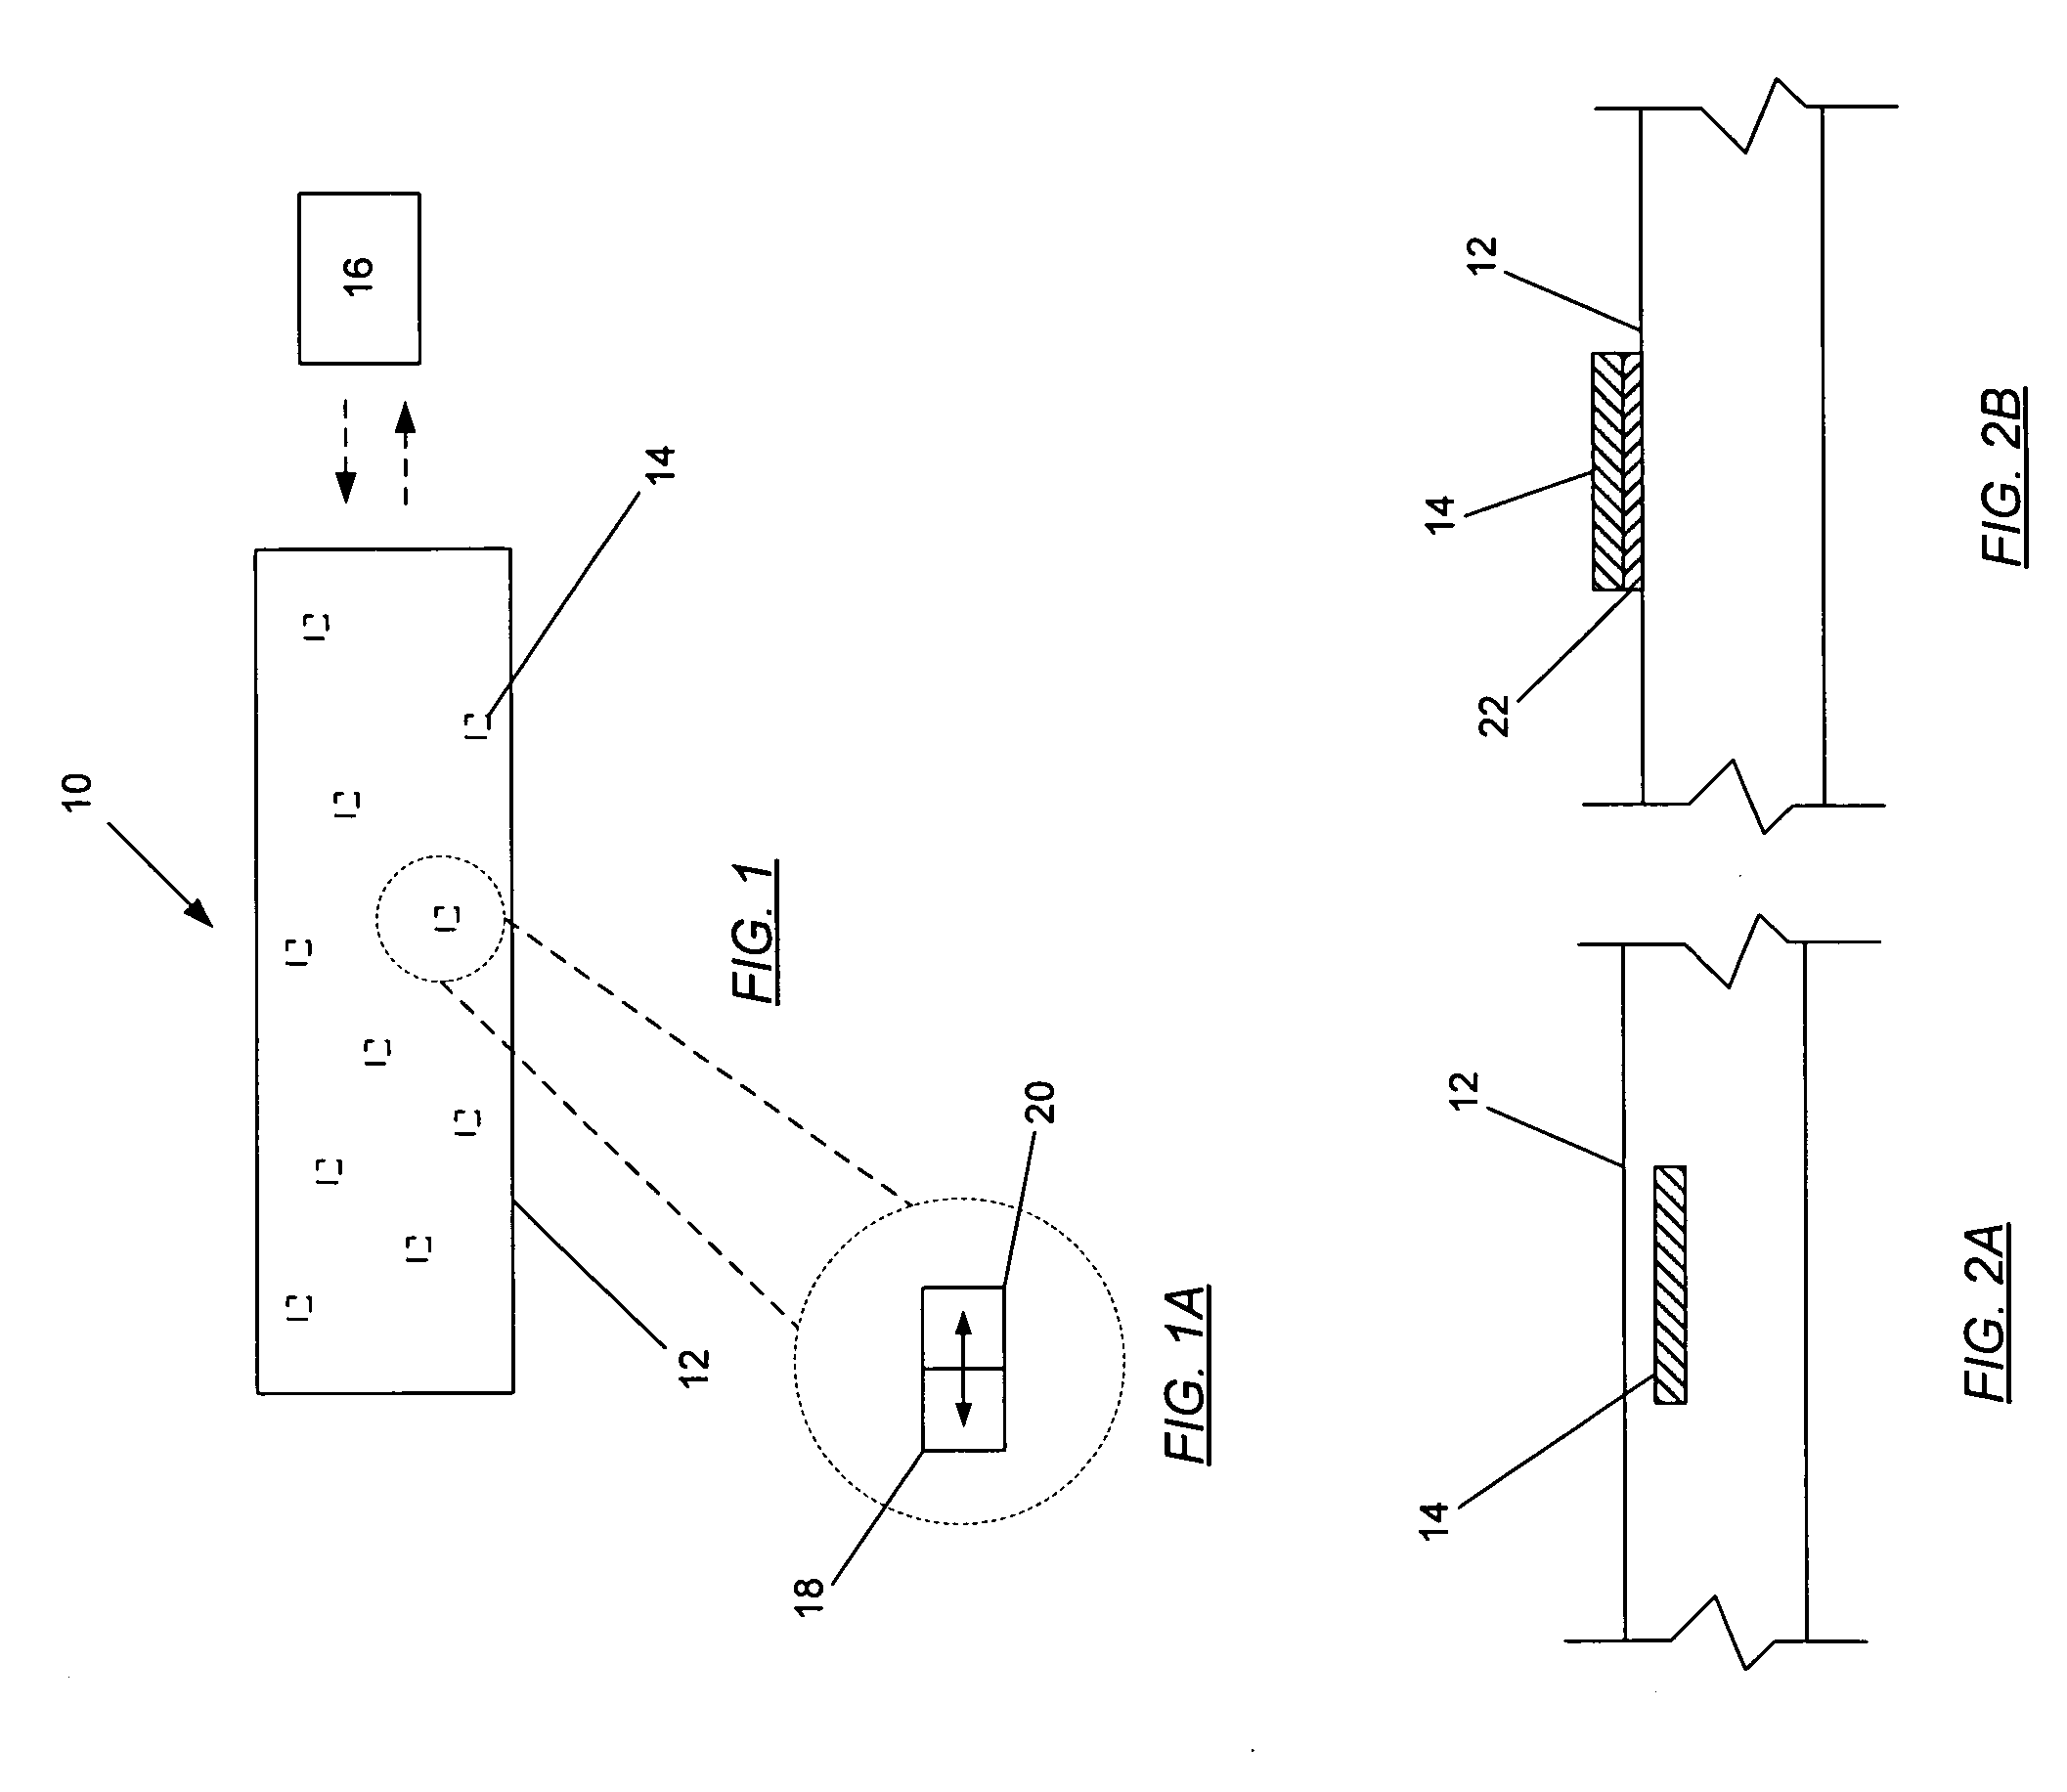 Structural assessment and monitoring system and associated method